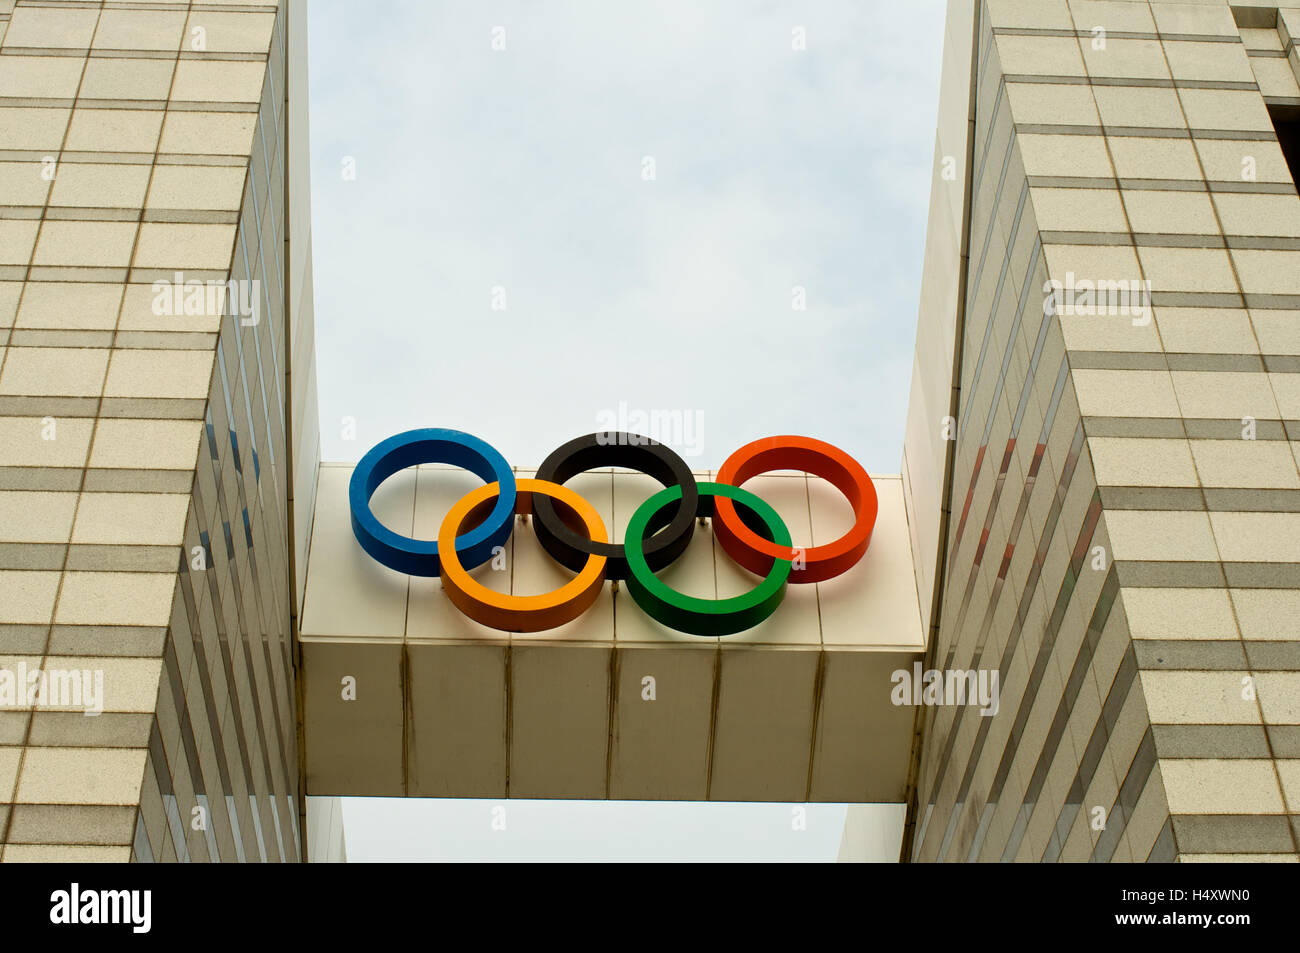 Olympic park in Seoul in summer, South Korea Stock Photo